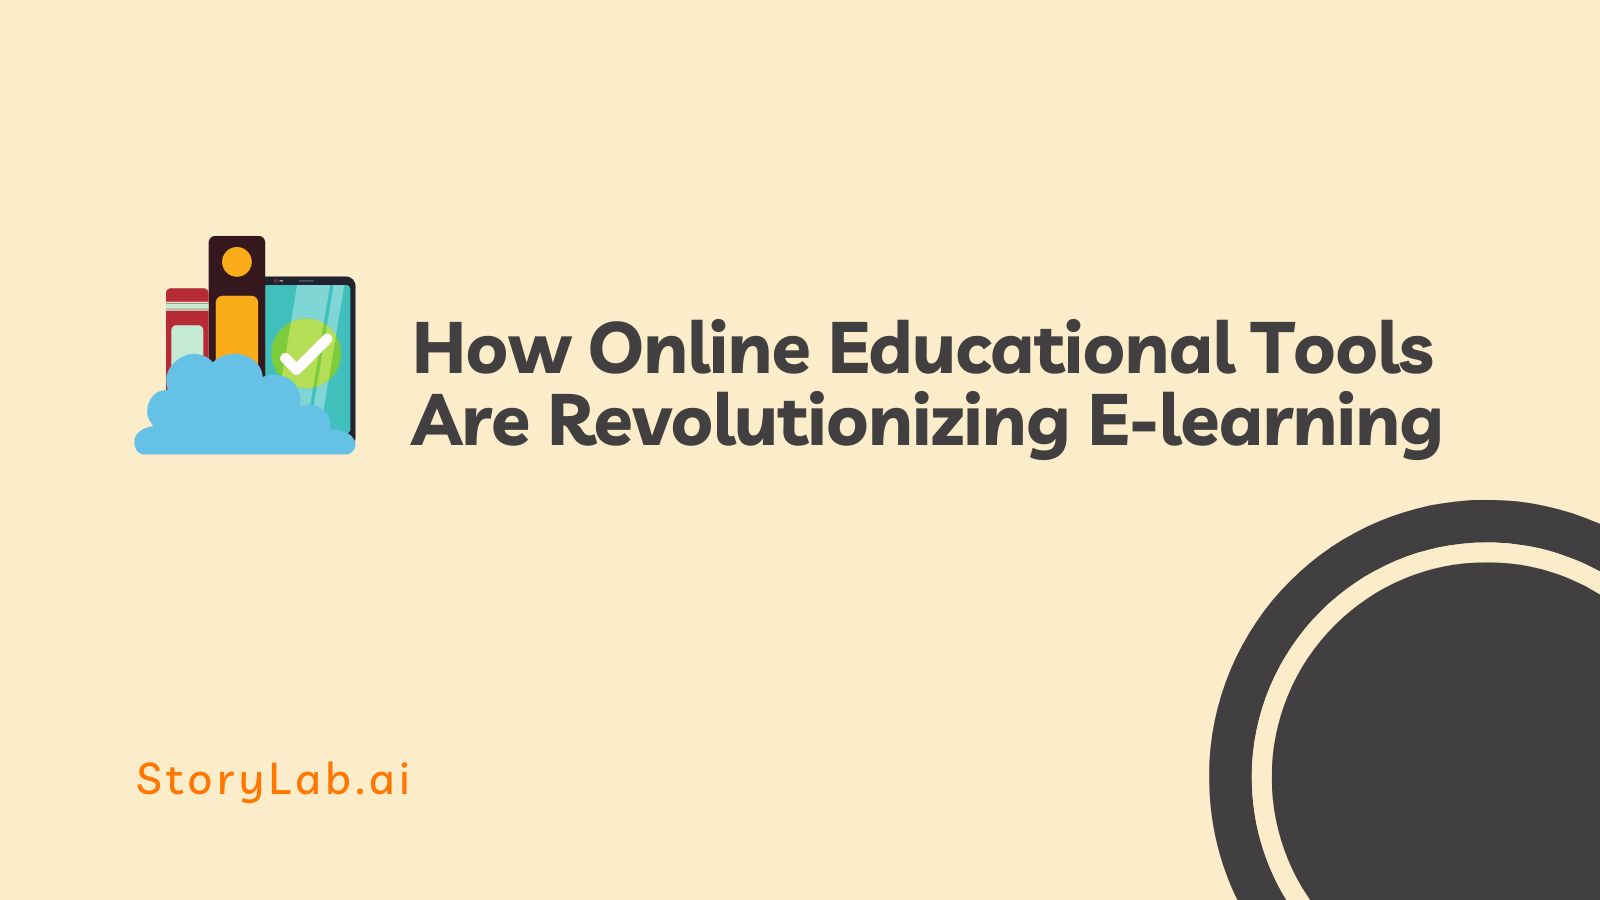 How Online Educational Tools Are Revolutionizing E-learning